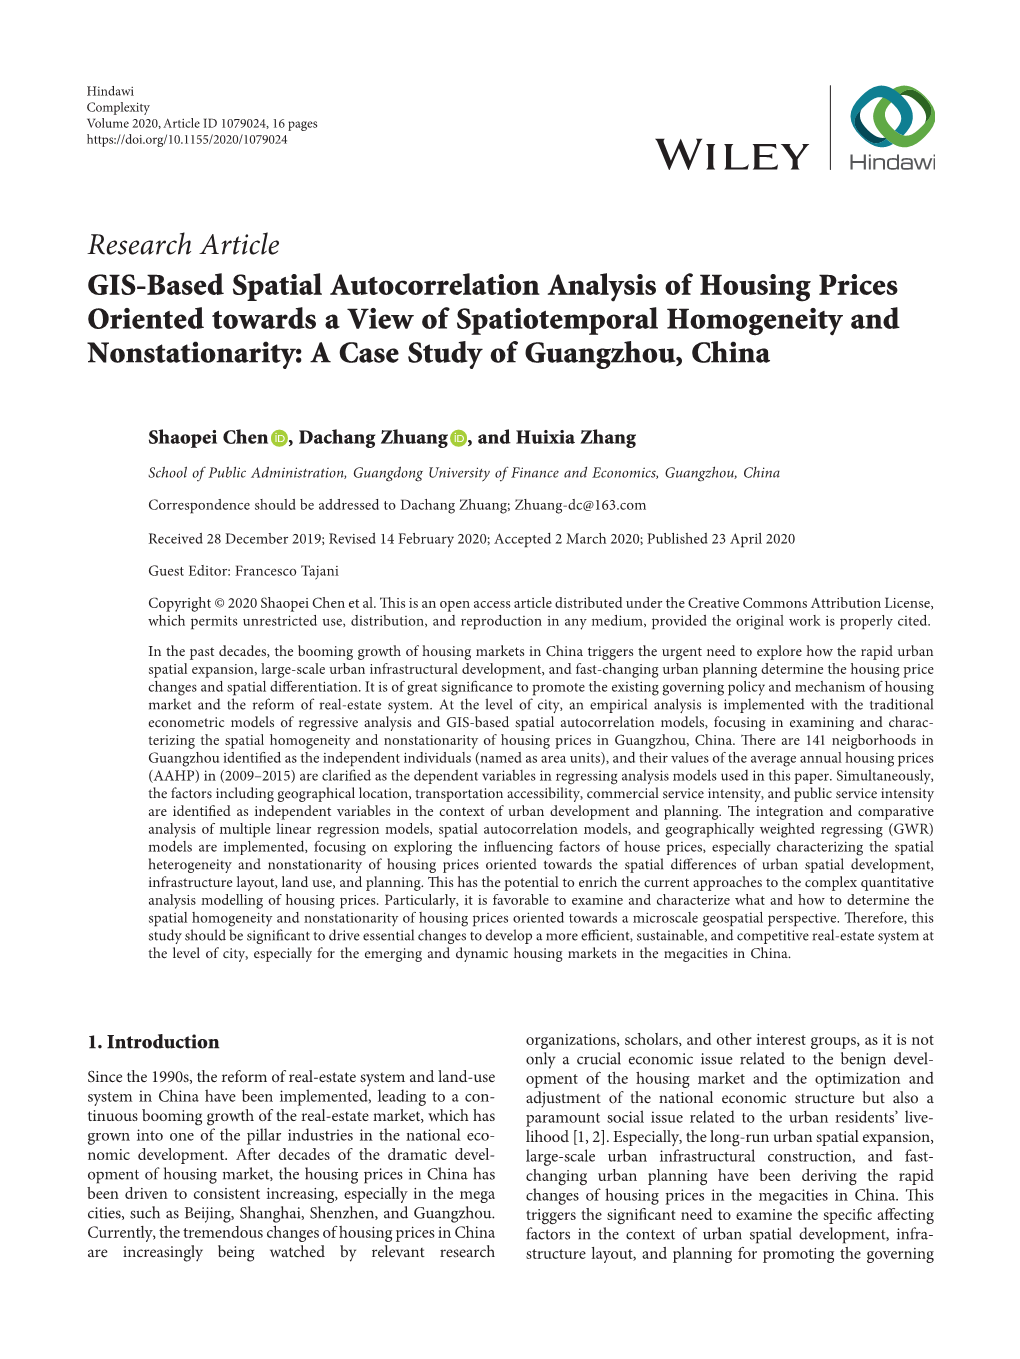 GIS-Based Spatial Autocorrelation Analysis of Housing Prices Oriented